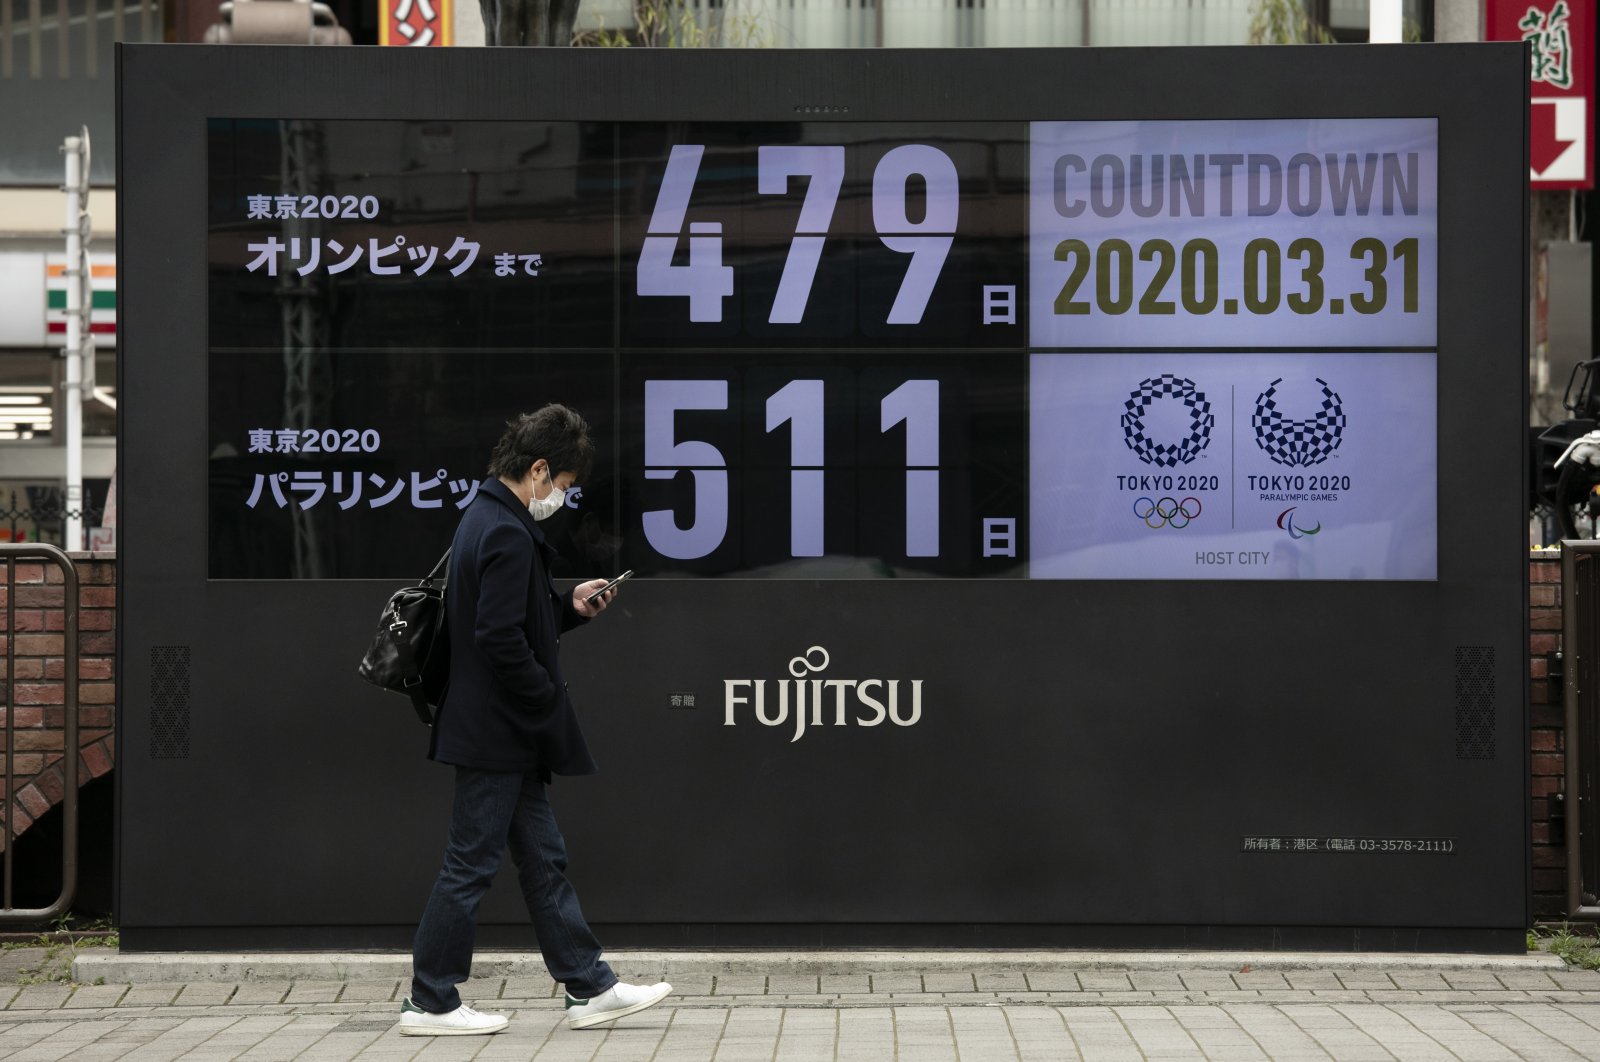 A man walks past a countdown display for the Tokyo 2020 Olympics and Paralympics, Tokyo, March 31, 2020. (AP Photo)